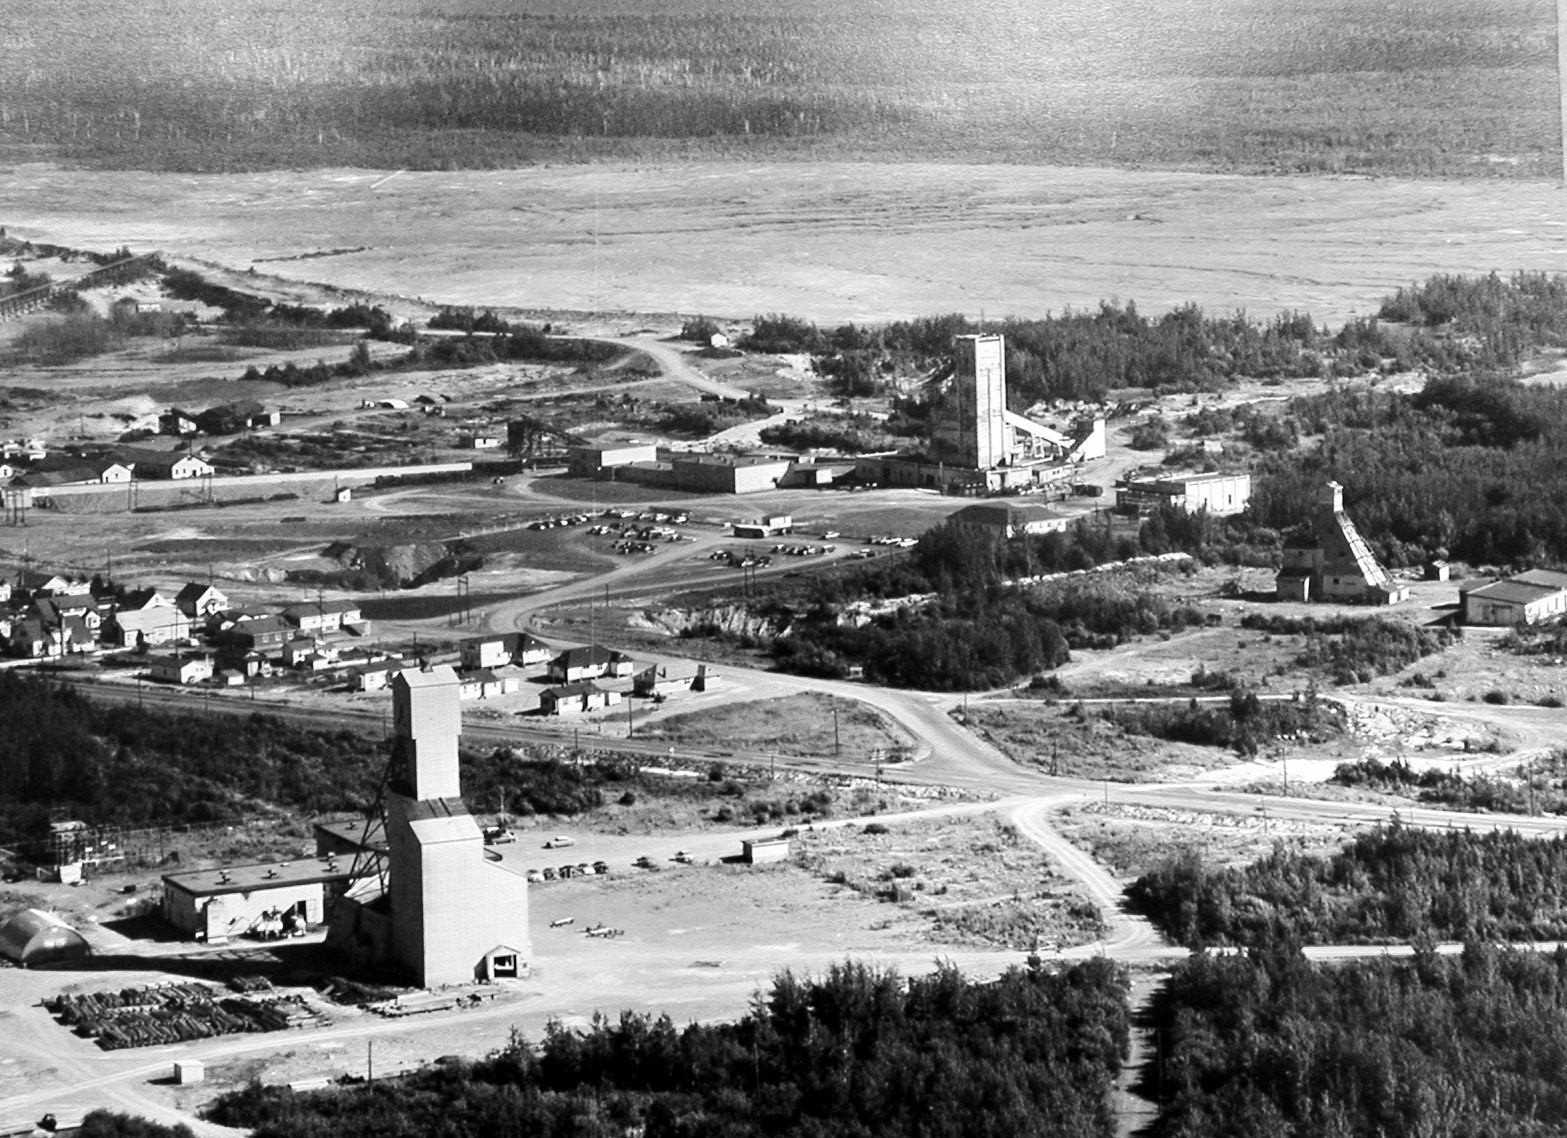 Black and white photograph of the installations of three mines, including their headframes, taken from a plane. In the centre, several houses of the private village of Halet. In the background, one of East Malartic’s mine tailings sites.